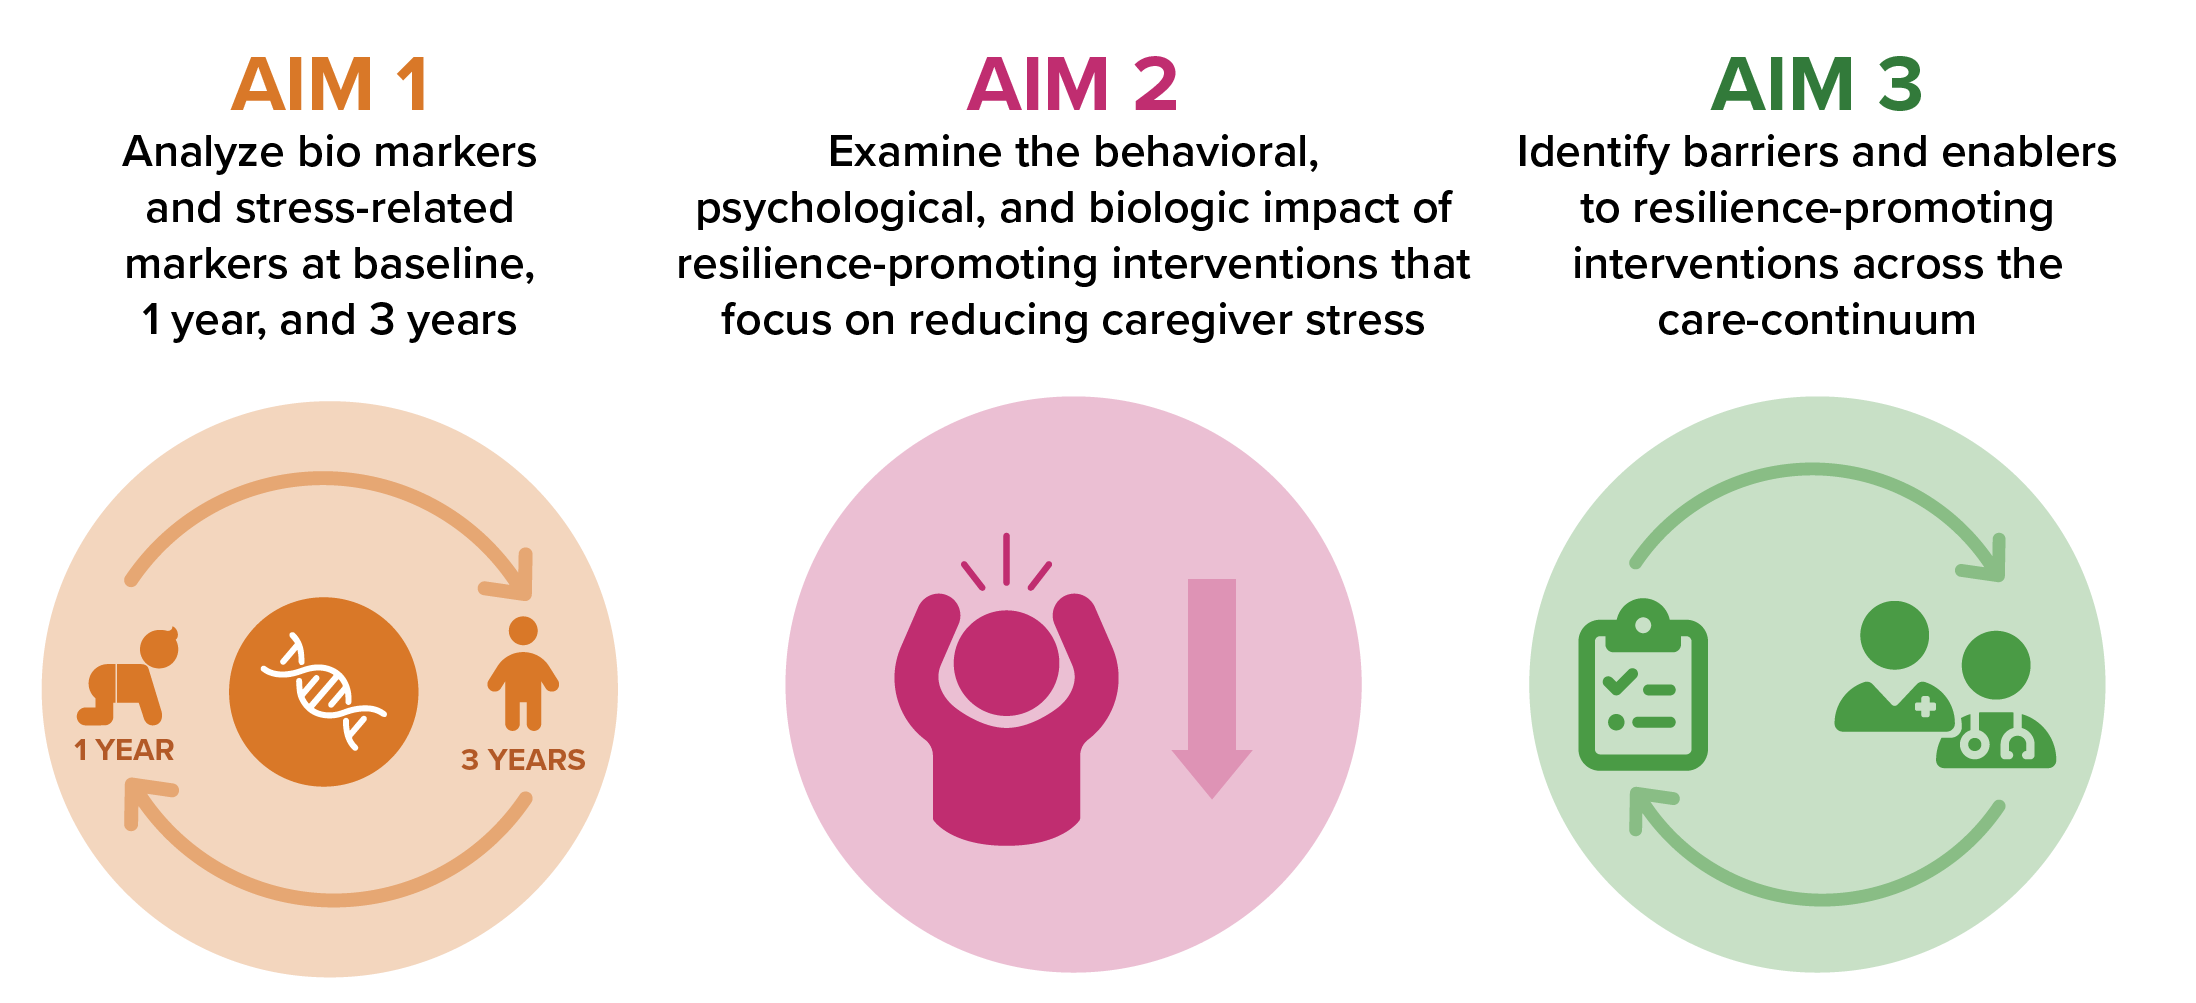 AIM Goals: 1: Analyze bio markers and stress-related markers at baseline, 1 year, and 3 years. 2: Examine the behavioral, psychological, and biologic impact of resilience-promoting interventions that focus on reducing caregiver stress. 3: Identify barriers and enablers to resilience-promoting interventions across the care-continuum.